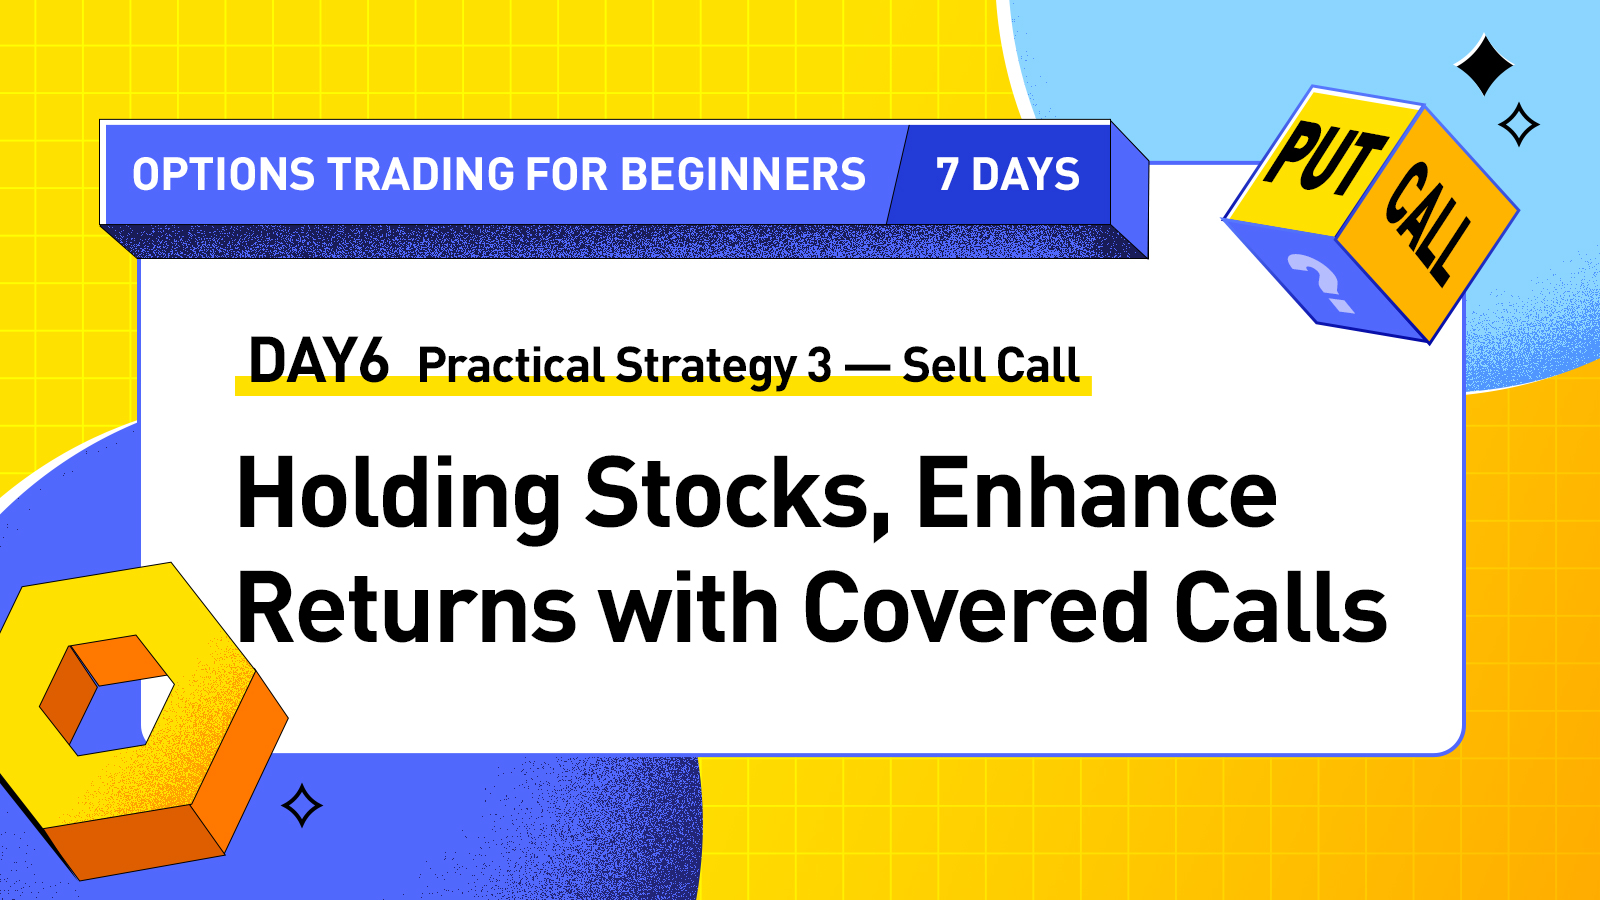 DAY6 - Practical Strategy 3: Holding Stocks, Enhance Returns with Covered Calls (Sell Call)